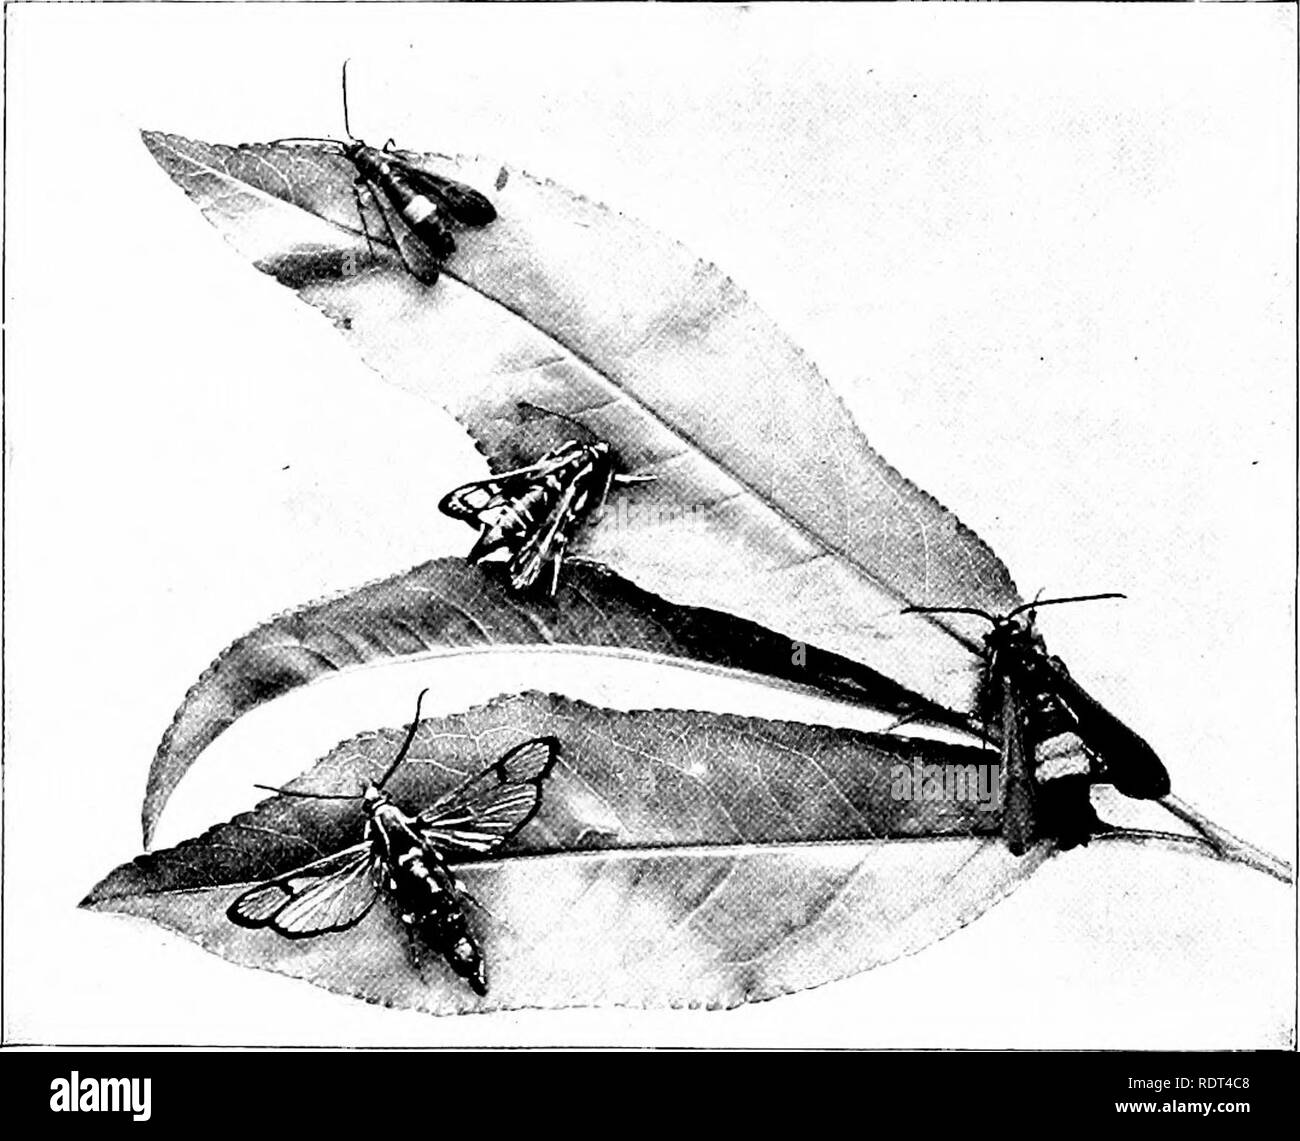 . First lessons in zoology. Zoology. 176 FIRST LHSSONS IN ZOOLOGY each lay one or a few eggs, which usually last through the winter, new &quot;stem mothers&quot; hatching from them the following spring. When the aphids get too crowded on a plant or tree some winged individuals are produced. Fig. 133.—Moths of the peach-tree borer, Sn}ini}wi(/cn cxit/osa, natural size; the iipperone and the one at the right are females. (I'hotograph b}' jI. . Slingerland.) which can fly to another food-plant and establish a new colony. It will almost certainl)' be noted during the course of observing that the Stock Photo